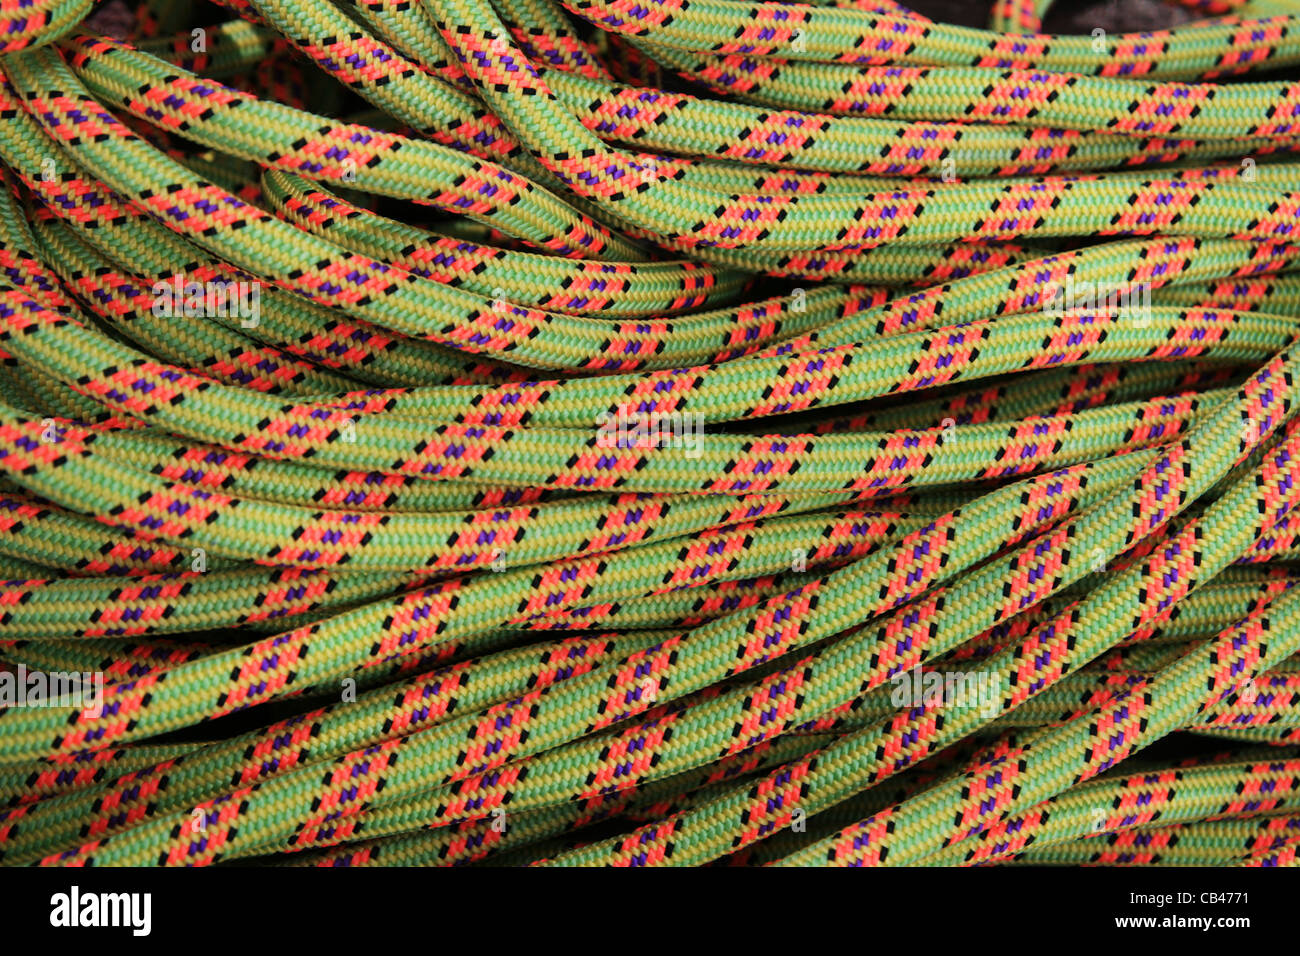 coiled up colored rock climbing rope background Stock Photo